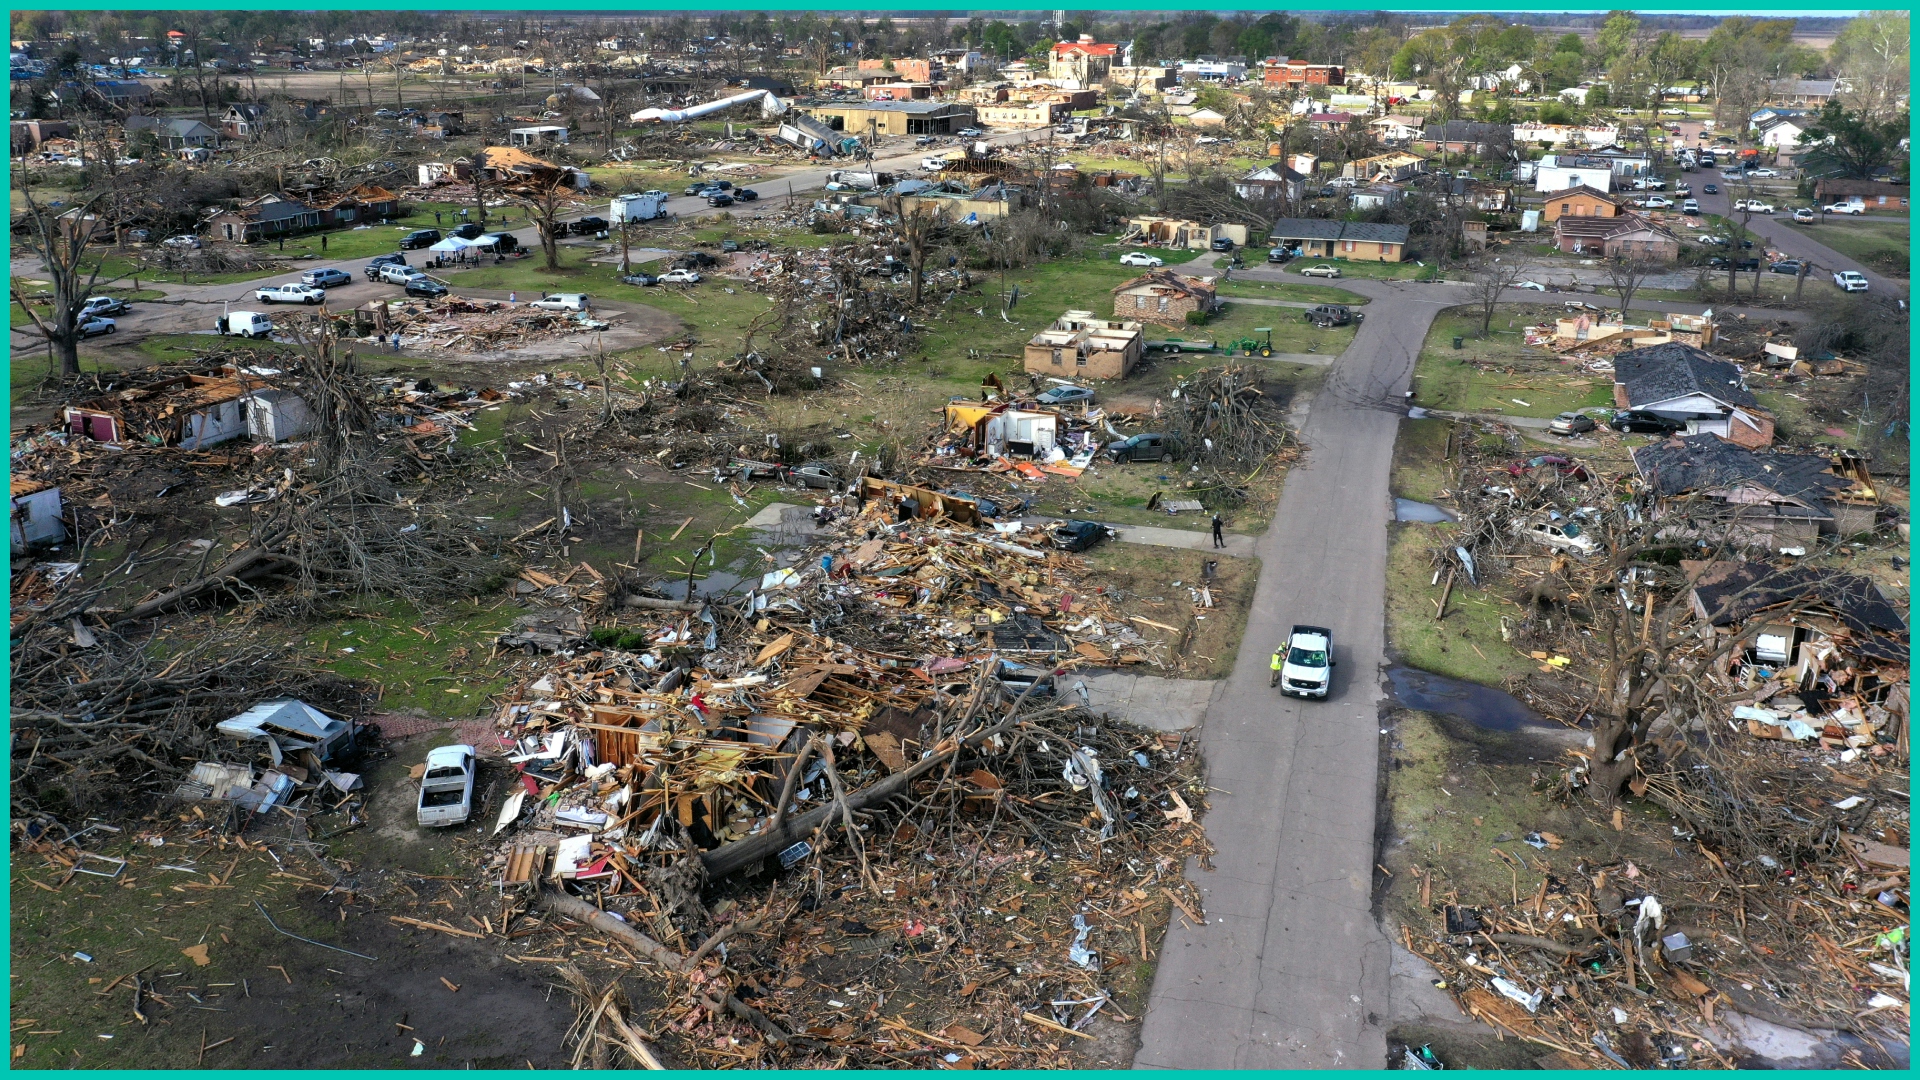  In an aerial view, piles of debris remain where homes once stood before Friday's EF-4 tornado 